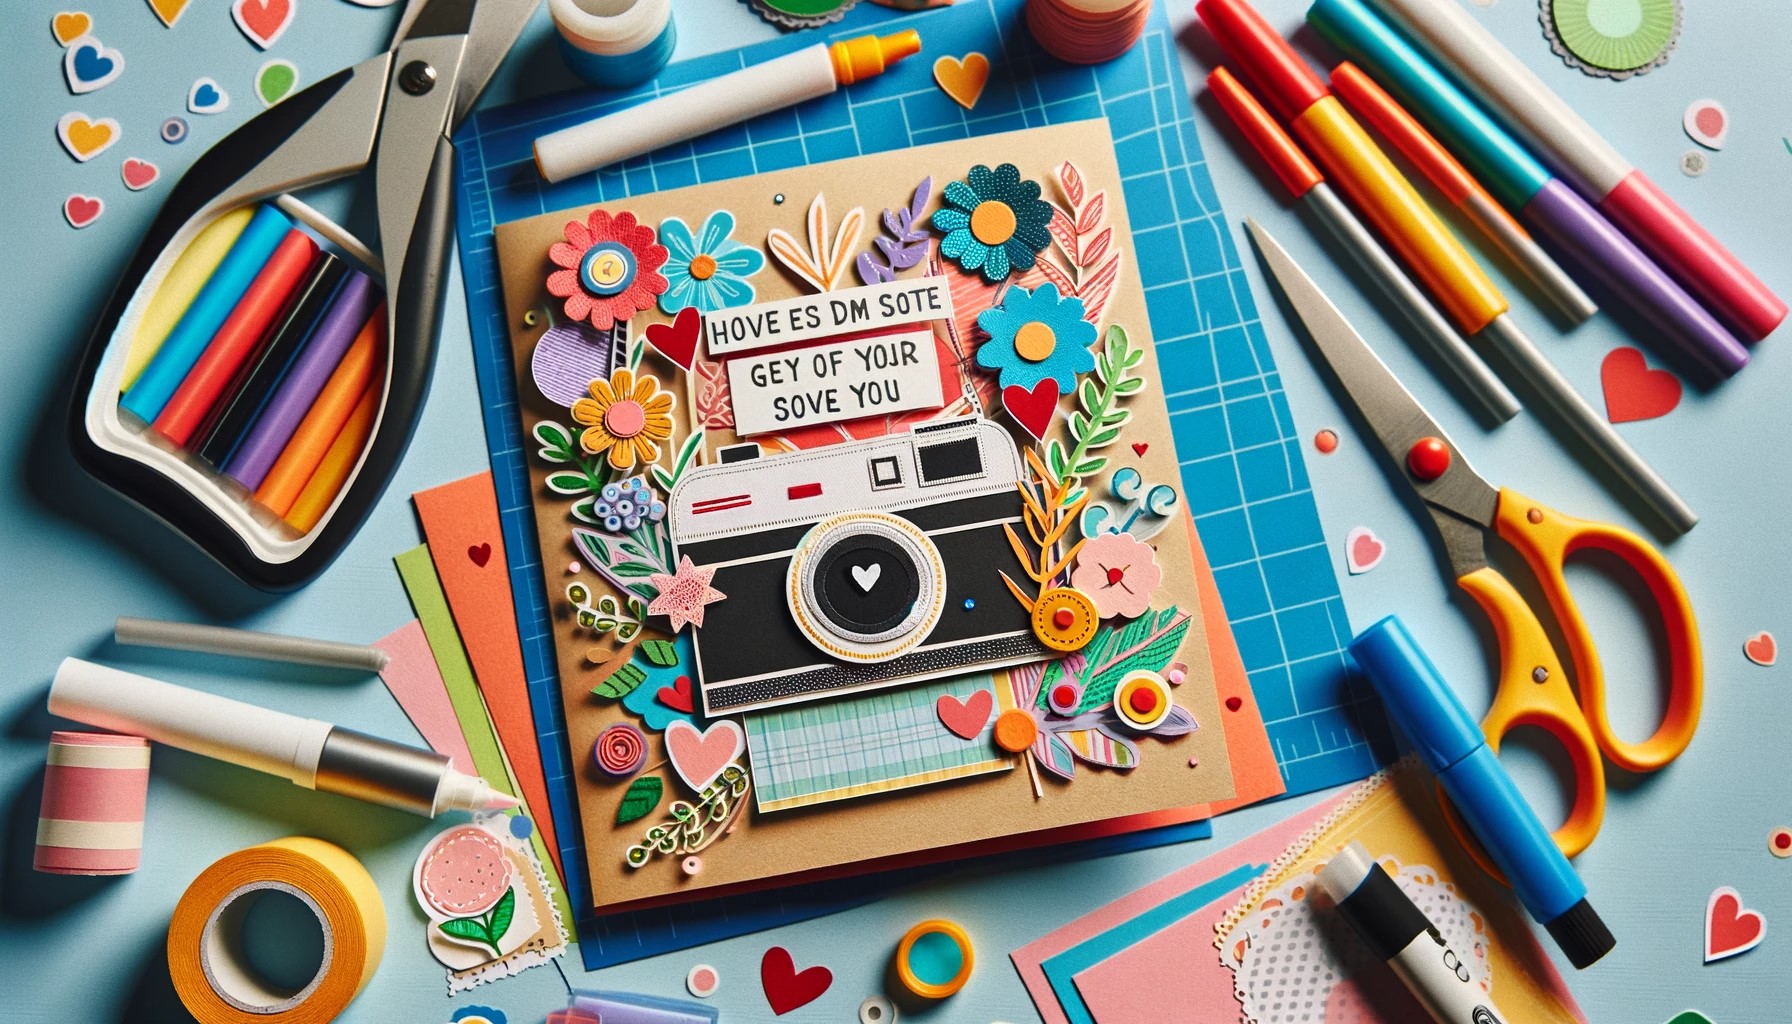 A personalized greeting card, open and standing on a crafting table, adorned with colorful paper, markers, and stickers. The card features a creative 